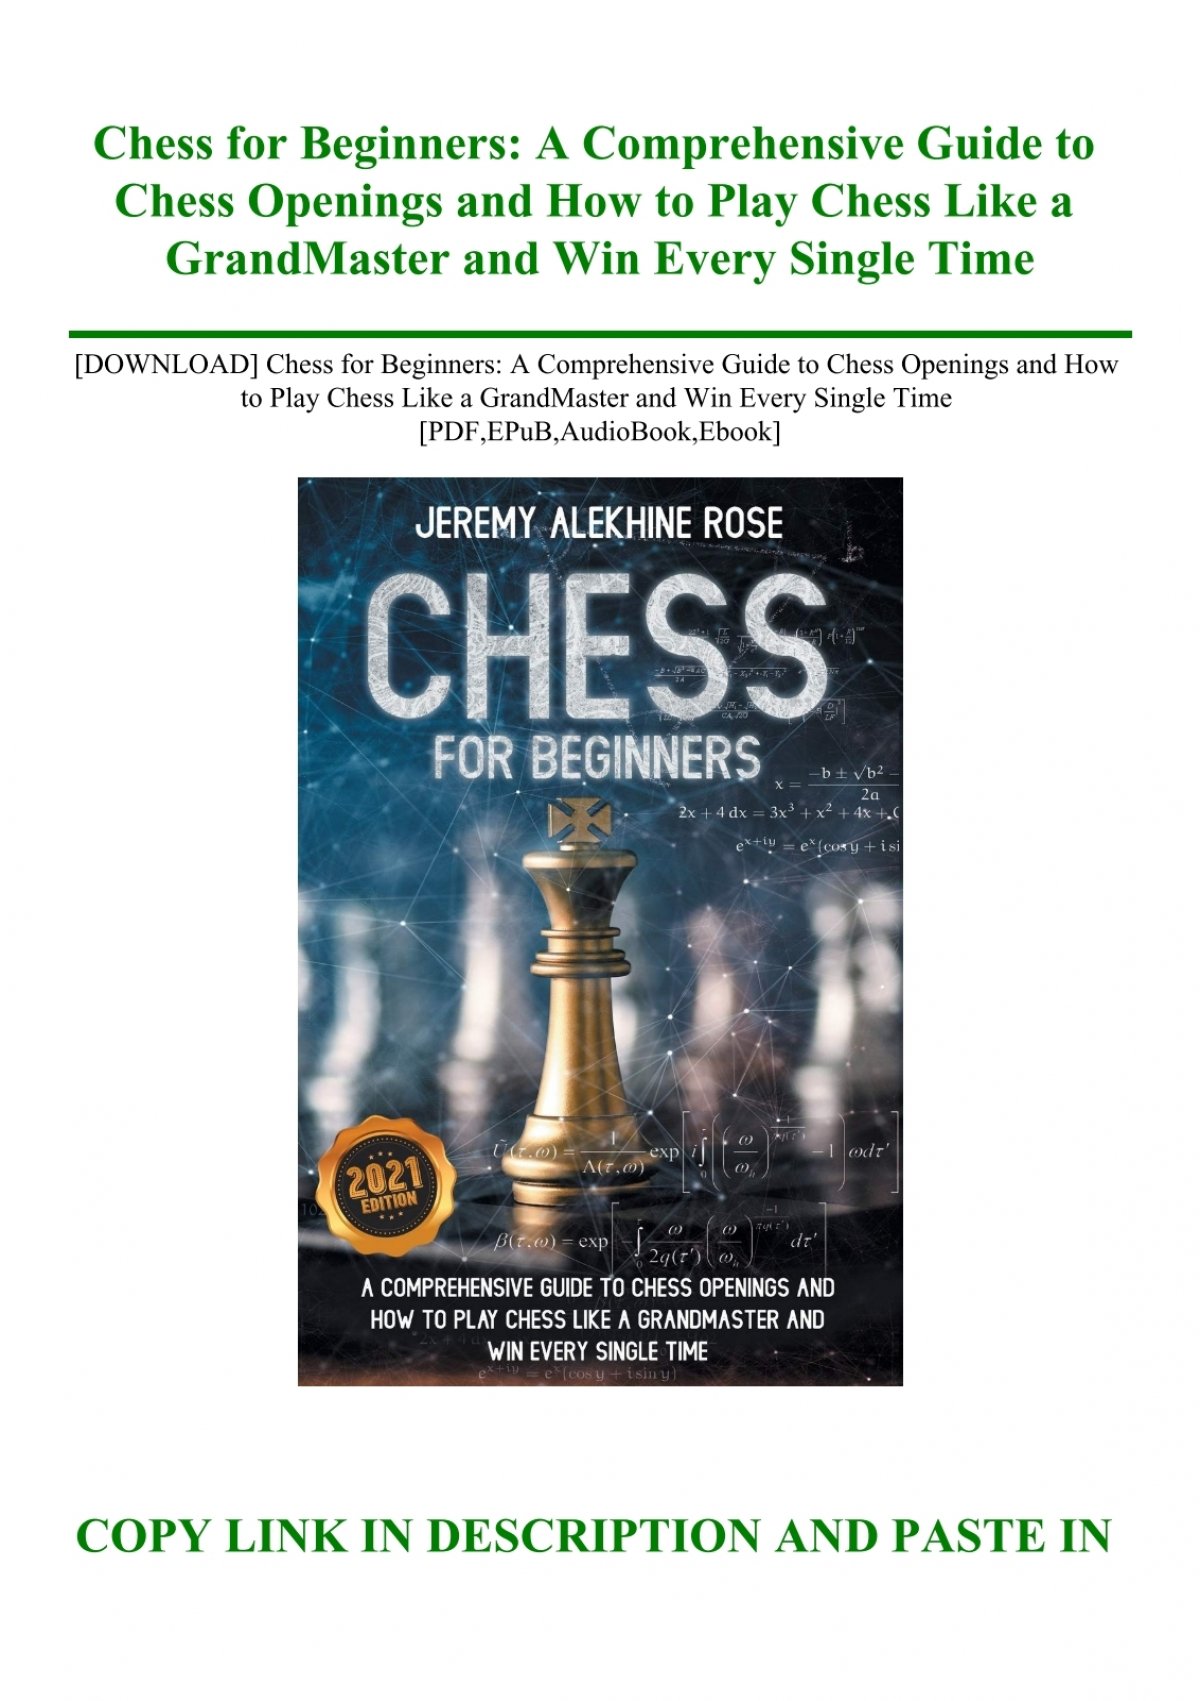 Download Chess For Beginners A Comprehensive Guide To Chess Openings And How To Play Chess Like A Grandmaster And Win Every Single Time Pdf Epub Audiobook Ebook